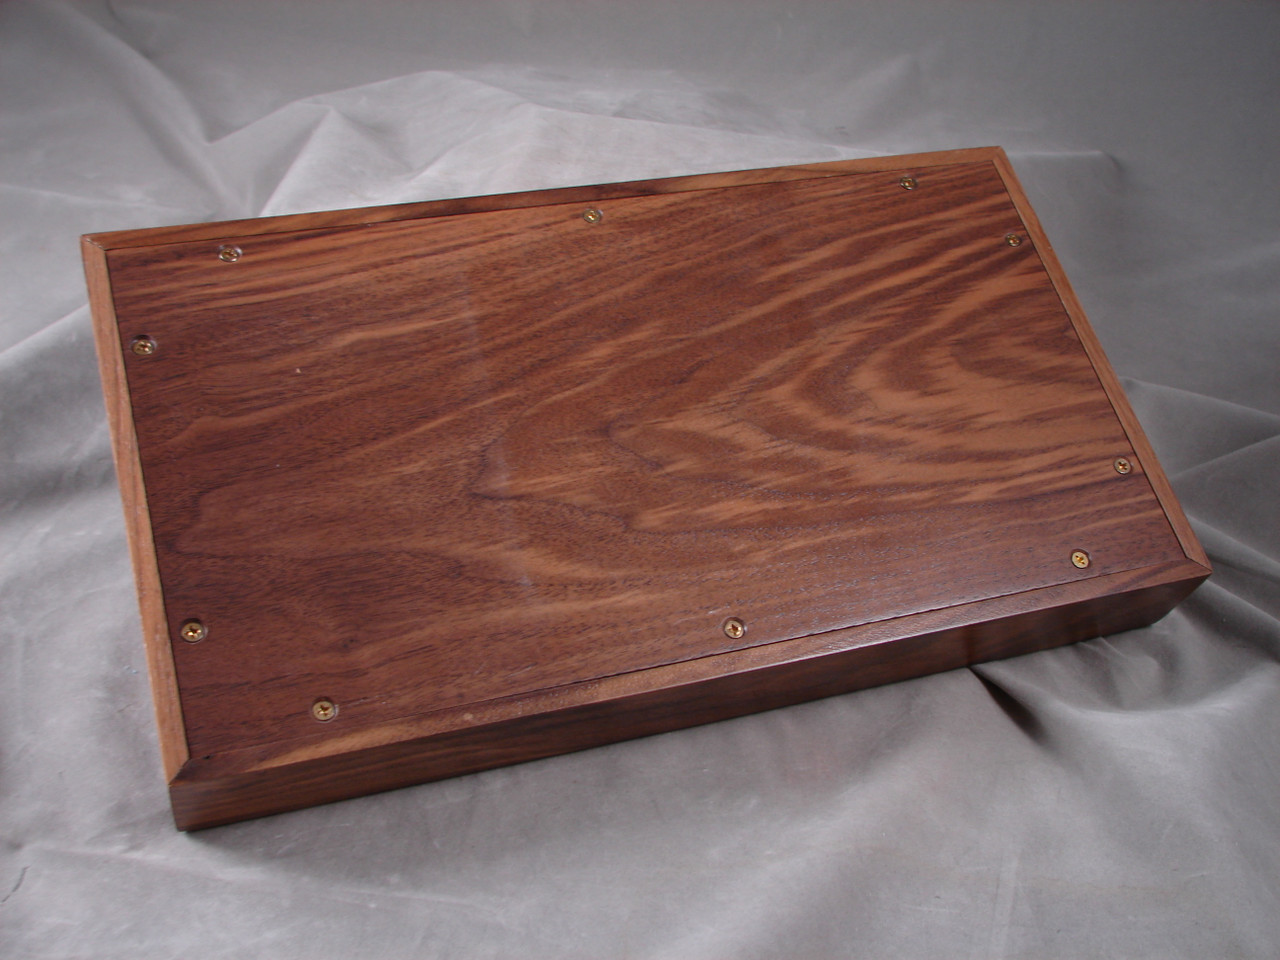 Walnut Serving Tray, With a Removeable Bottom for ease of Laser Engraving